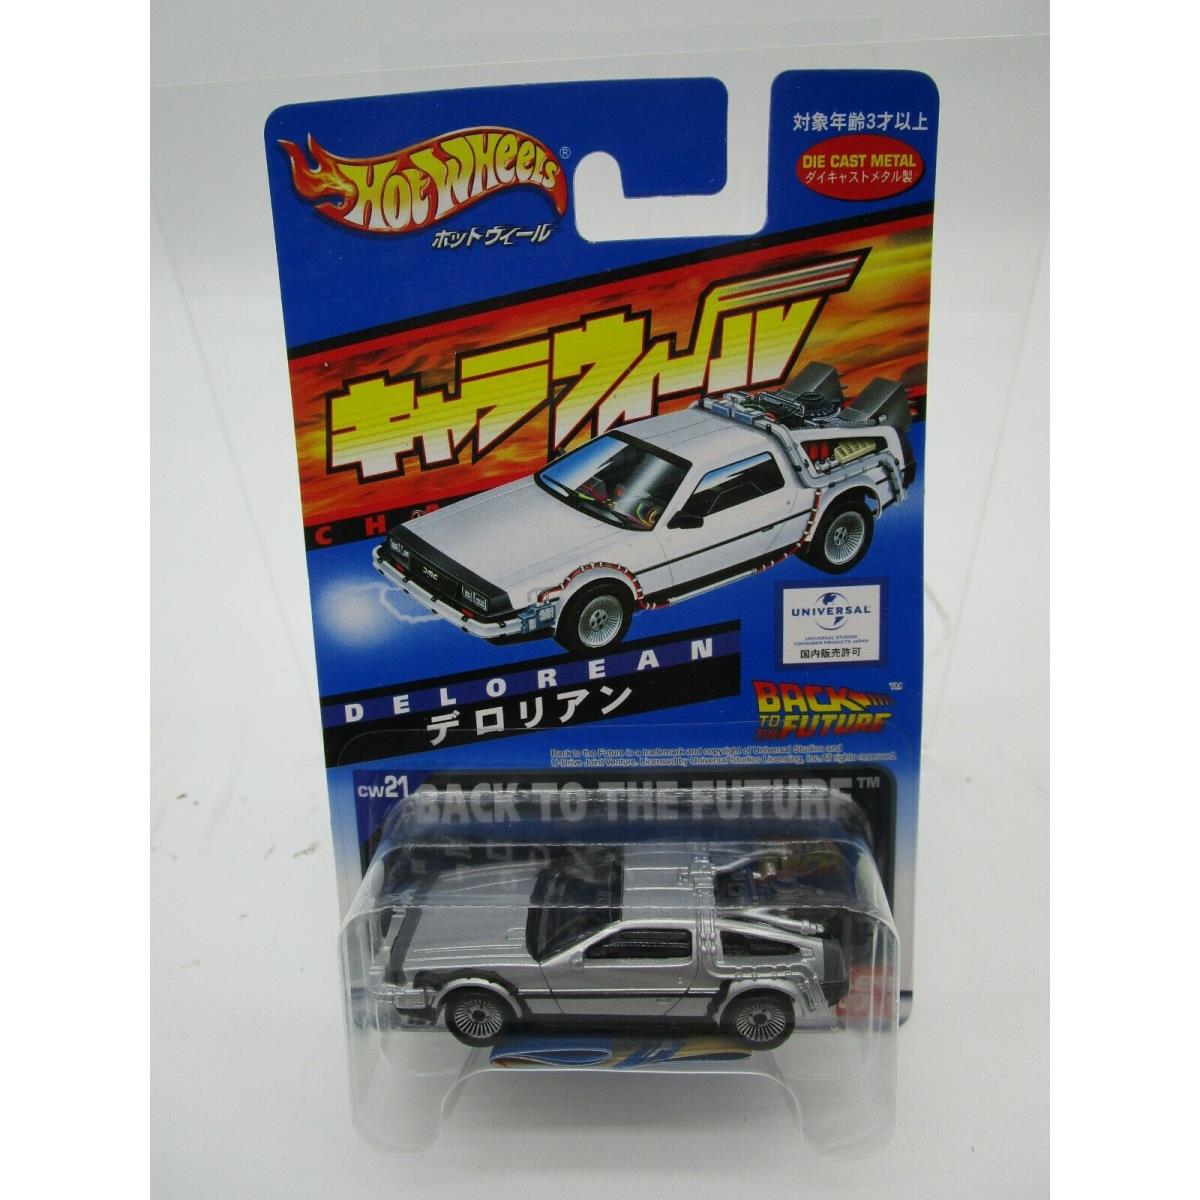 2001 Hot Wheels Back TO The Future Delorean Released Only IN Japan